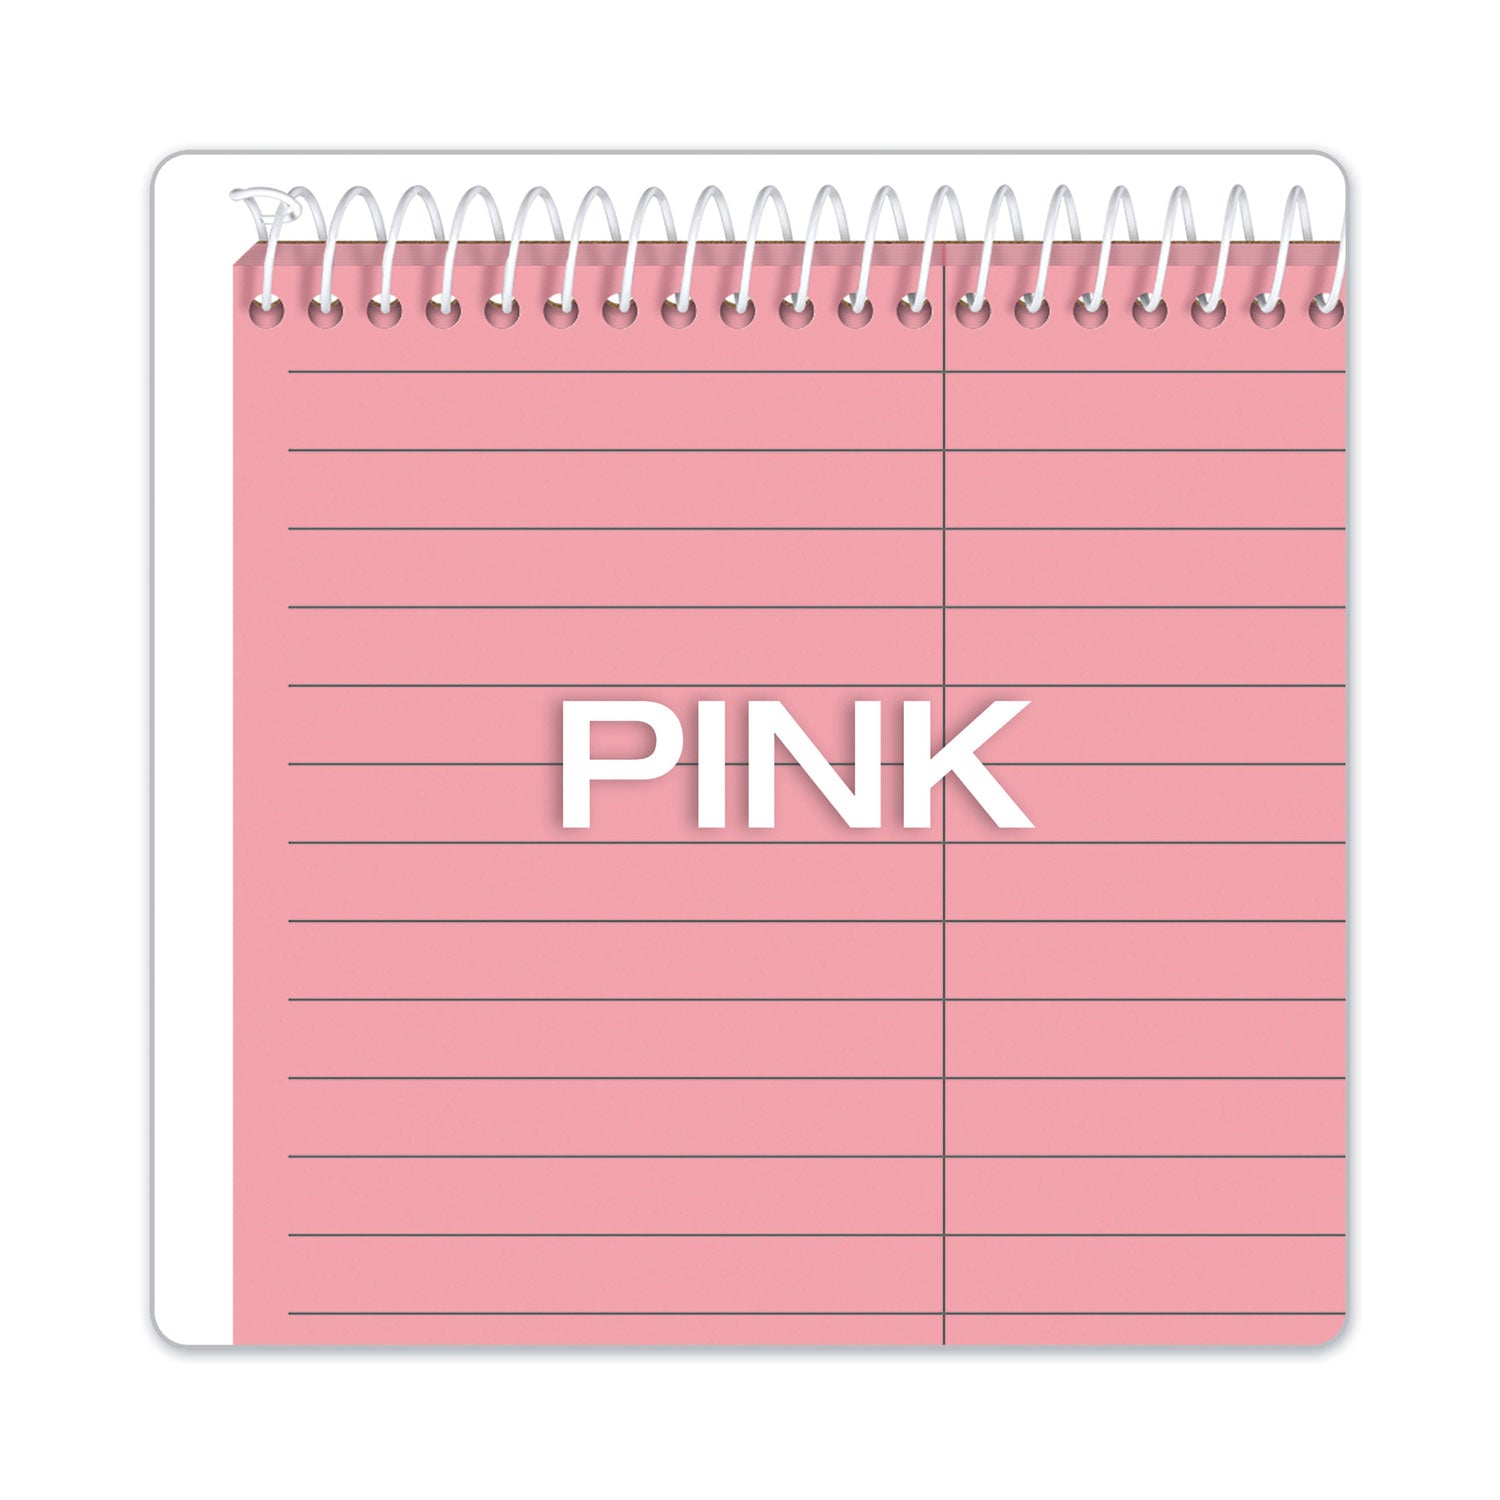 Prism Steno Pads, Gregg Rule, Pink Cover, 80 Pink 6 x 9 Sheets, 4/Pack - 